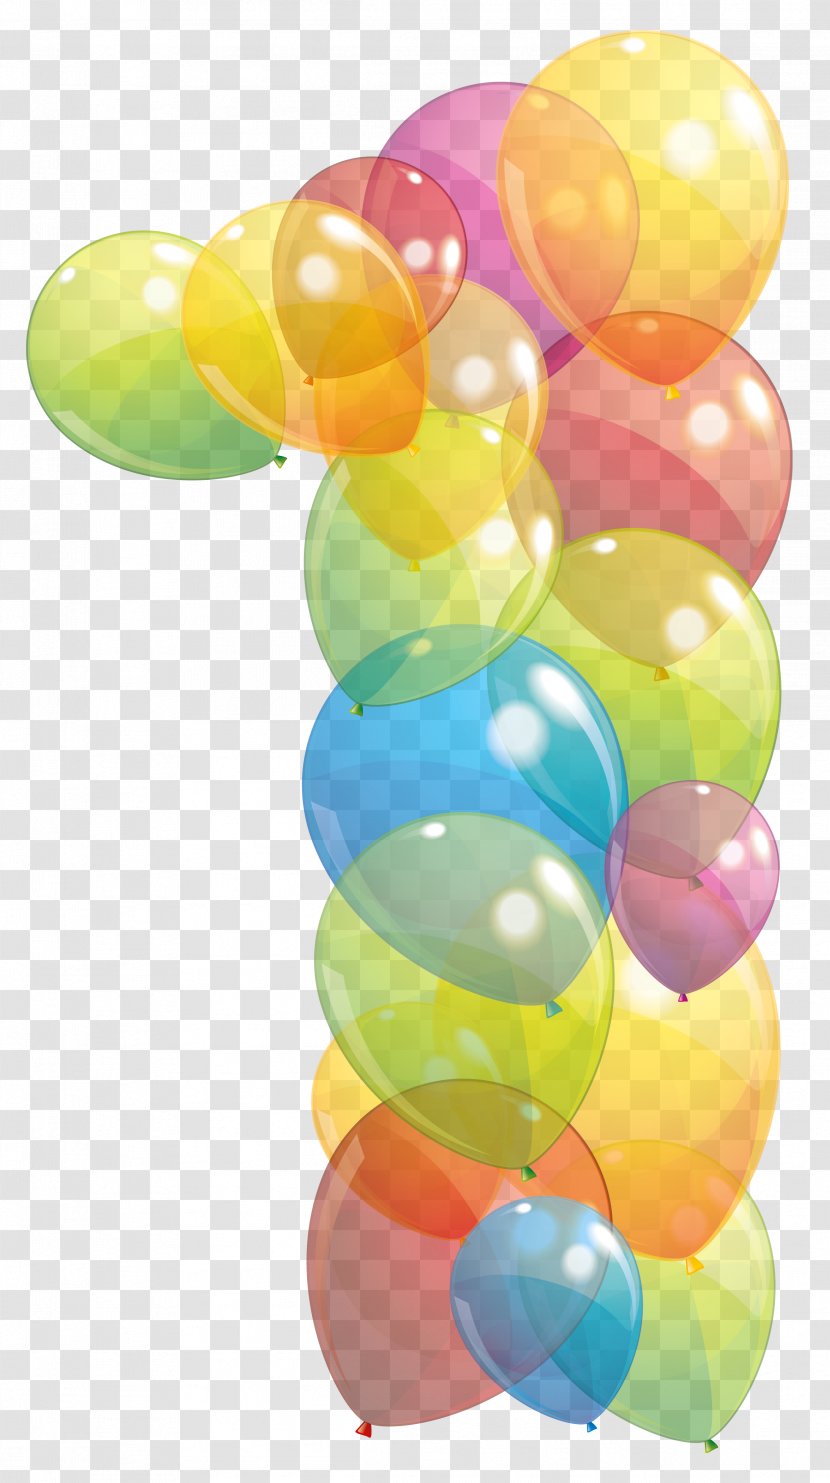 Yellow Balloon - Transparent One Number Of Balloons Clipart Image Transparent PNG